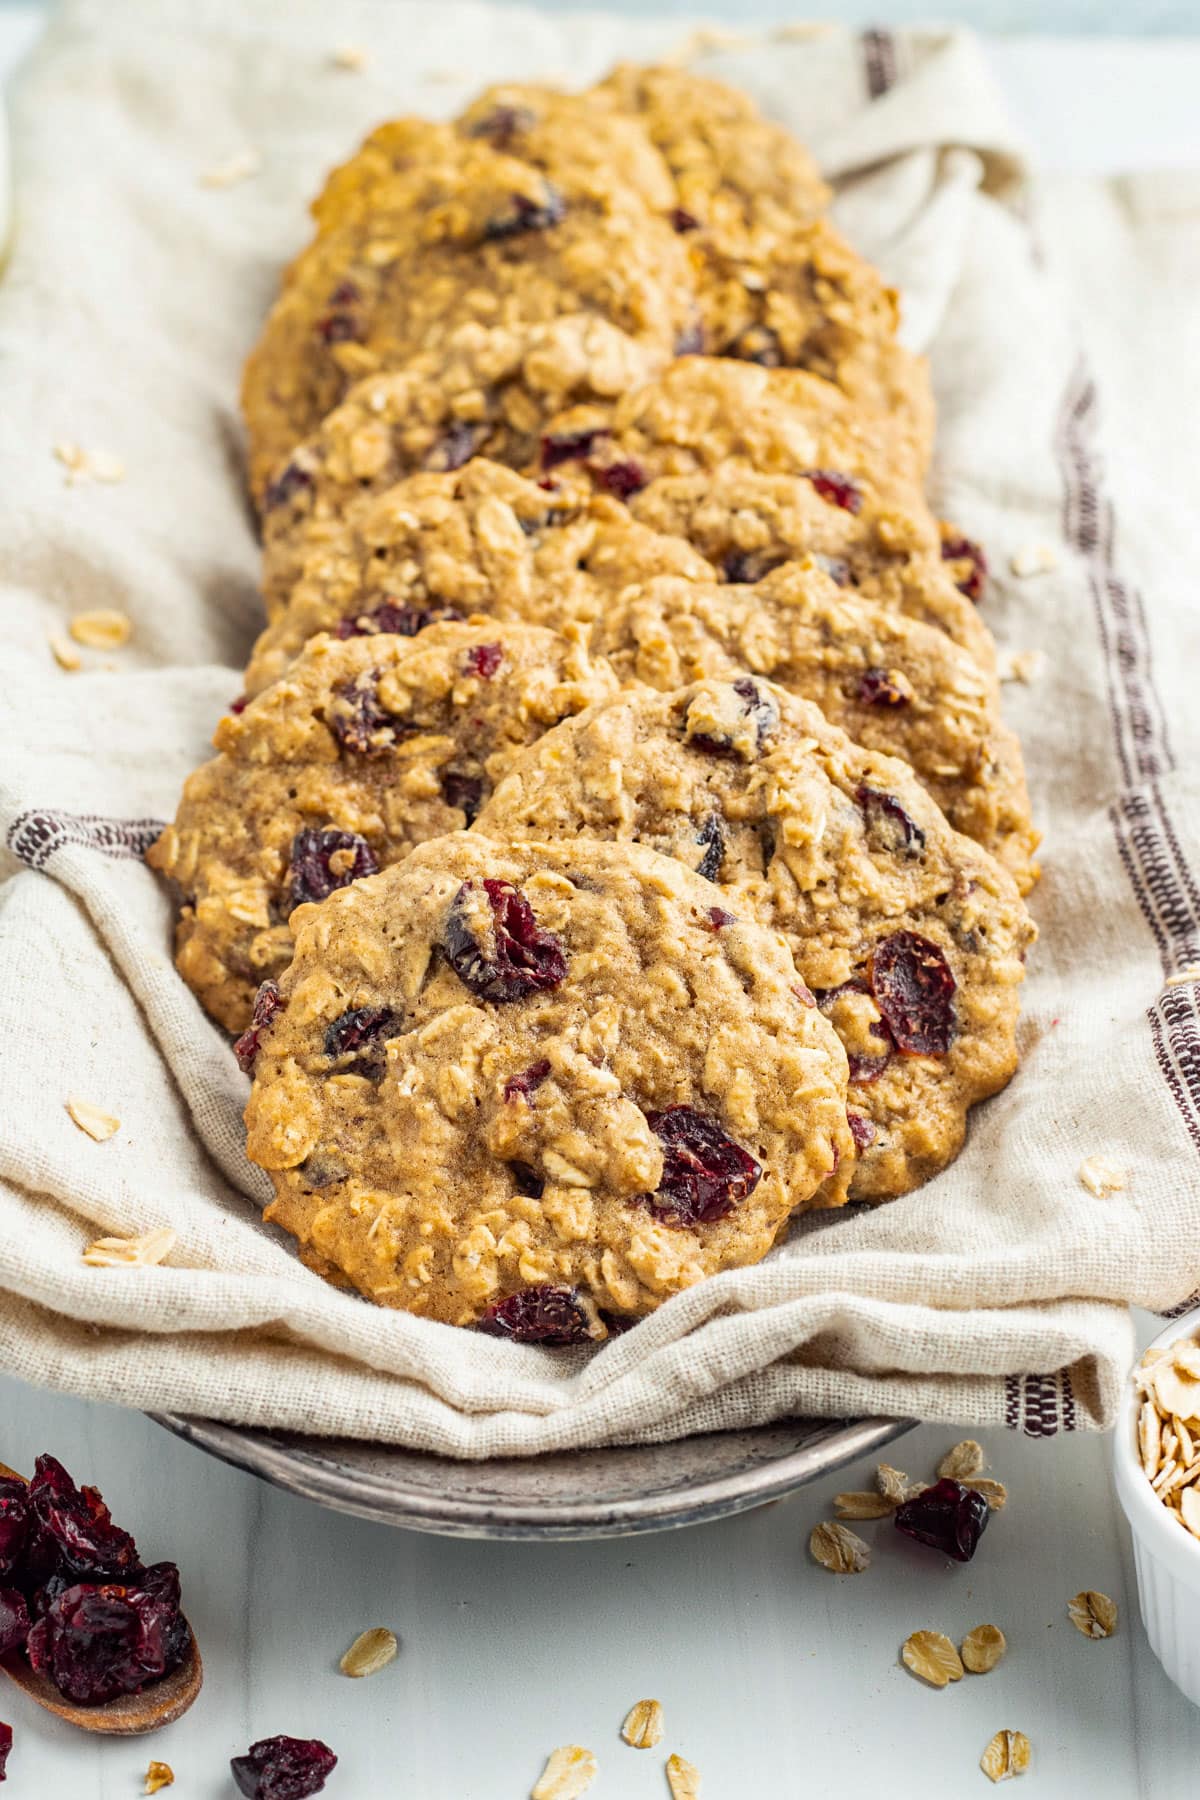 Oatmeal cranberry cookies arranged on a shallow plate lined with a cloth napkin.